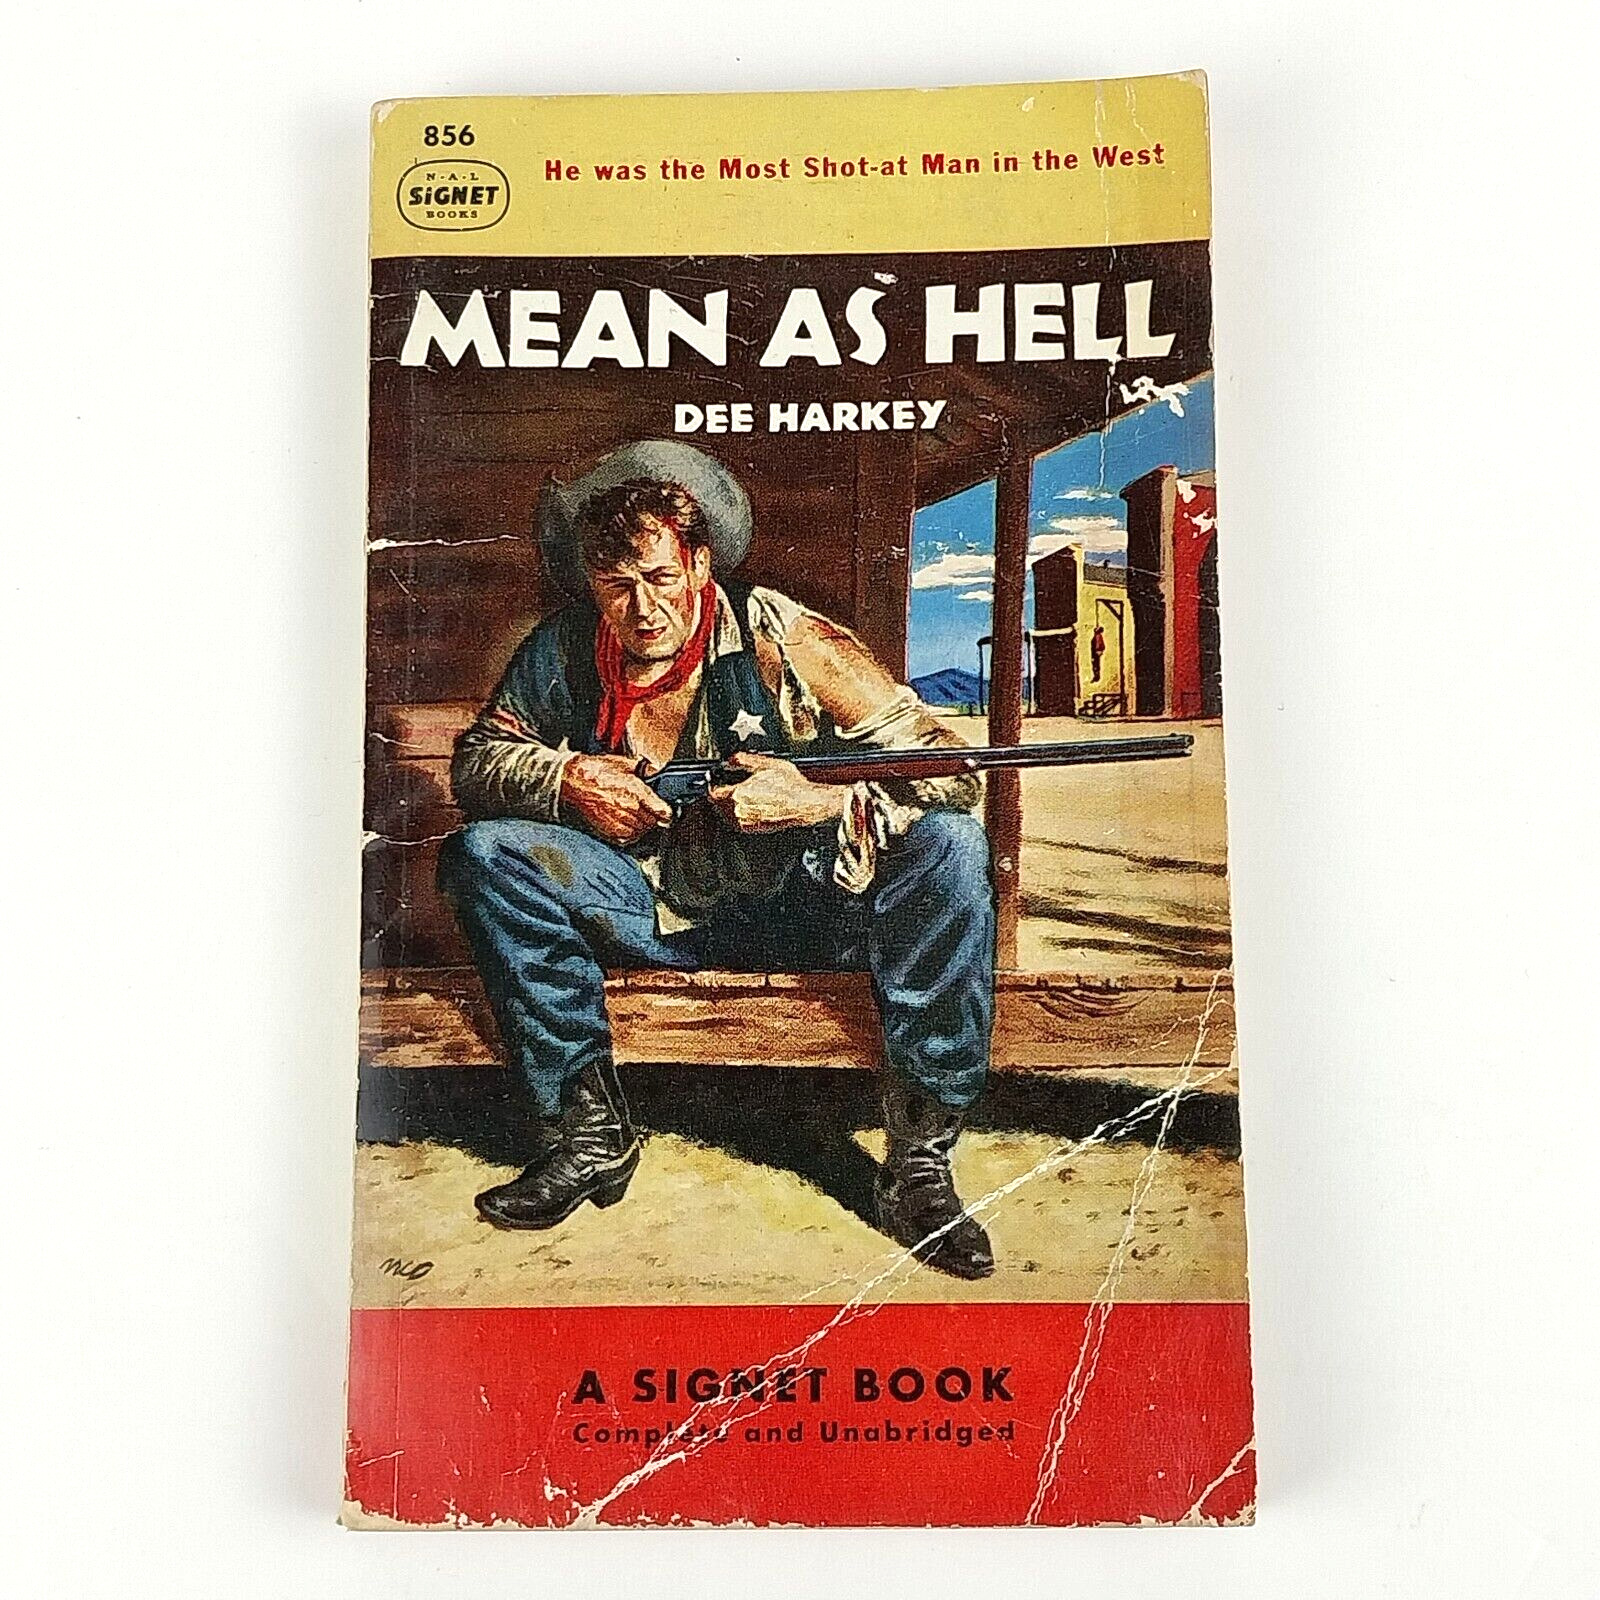 Vintage Mean As Hell 1951 1st Edition Western Paperback Book by Dee Harkey RARE